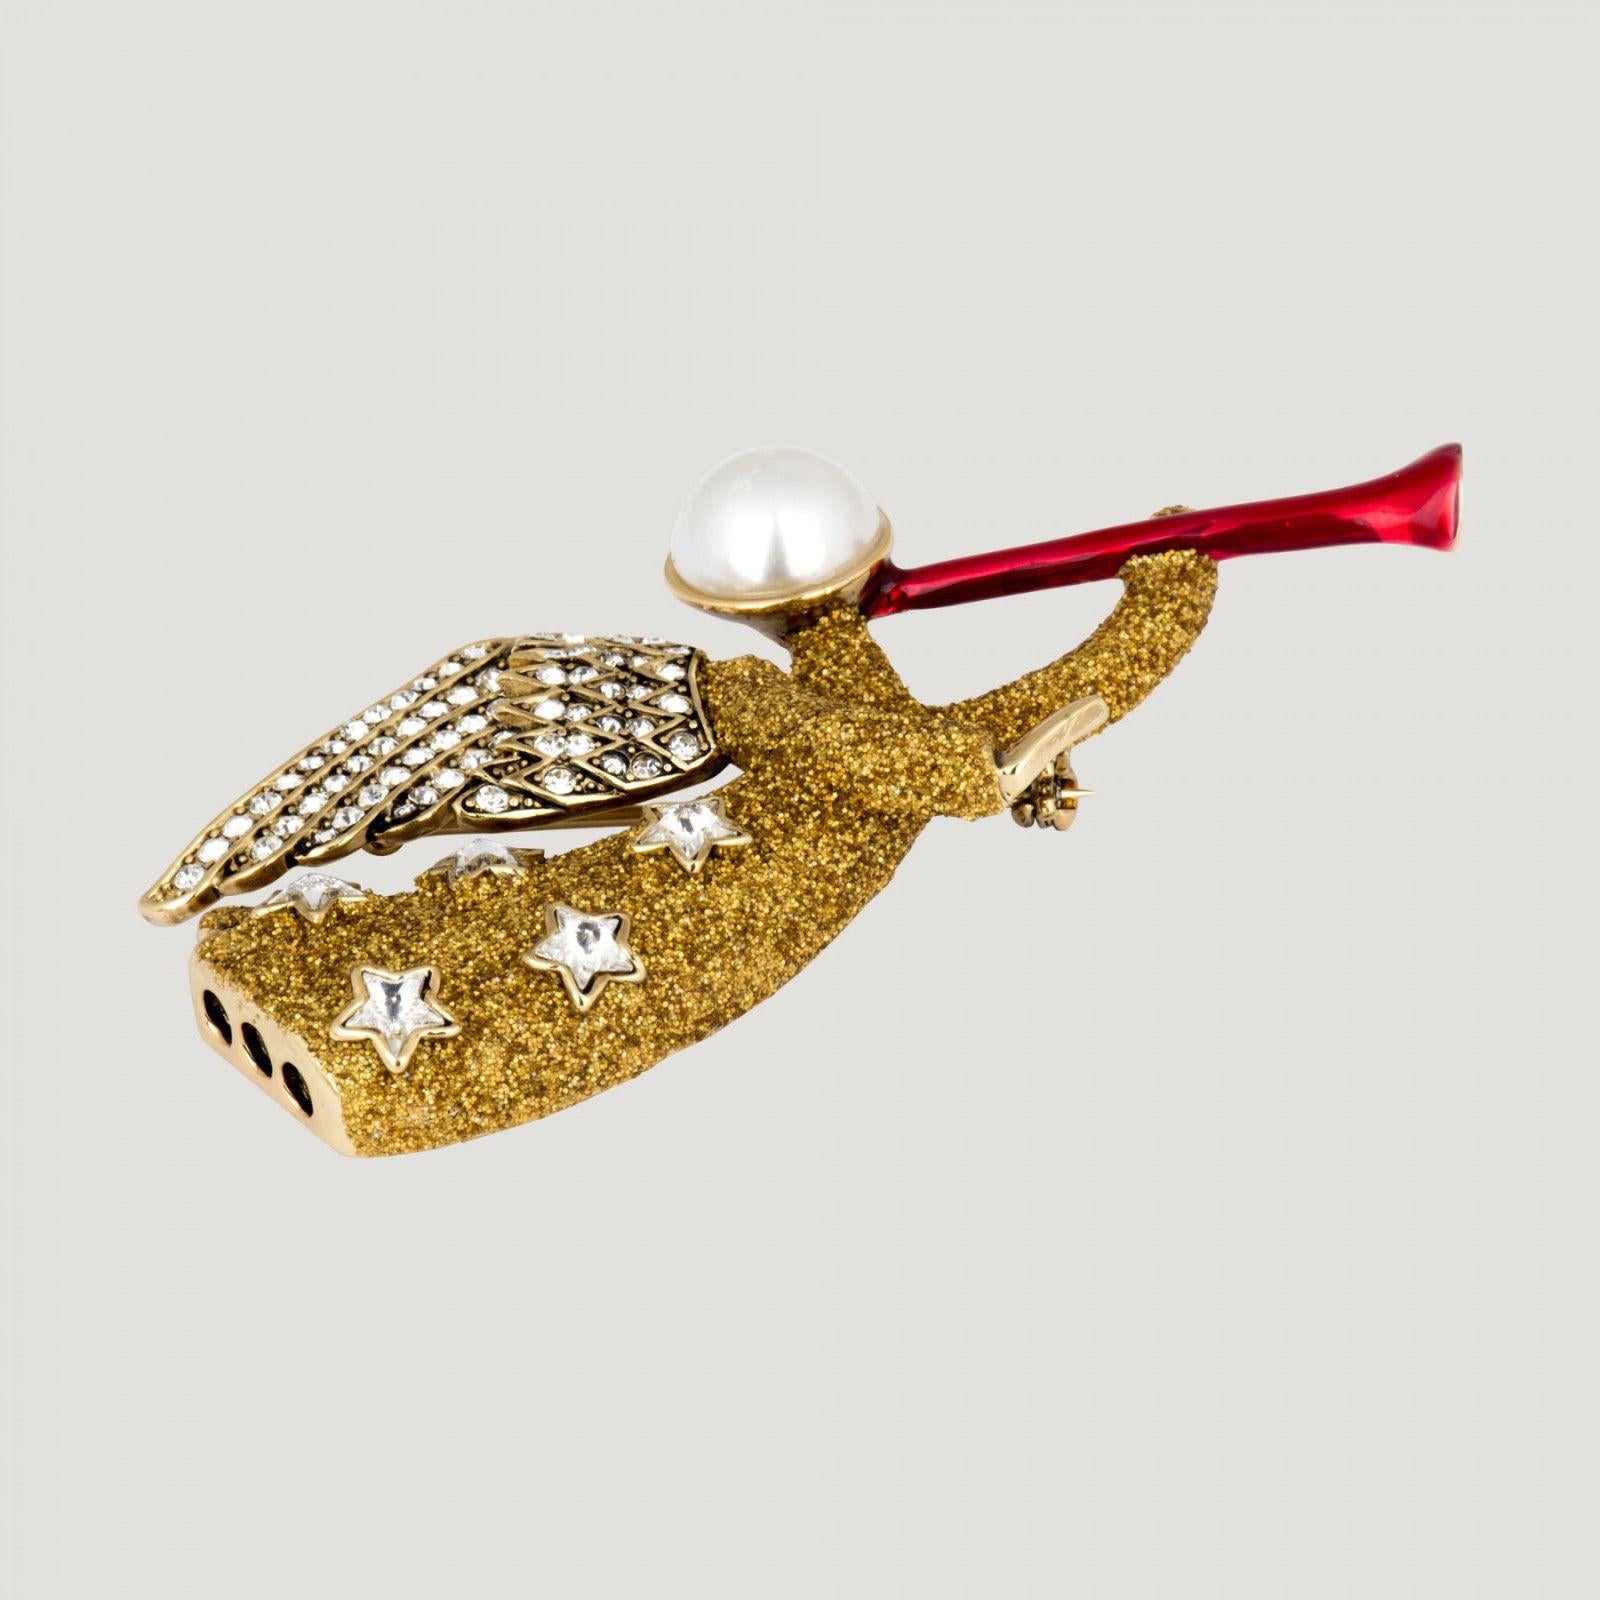 Beautiful Brooch featuring an Angel blowing a Horn; set with sparkling Faux Diamonds and Gold Glitter. Signed with a BW authenticity tag on the reverse; Measures approx. 8cm/3